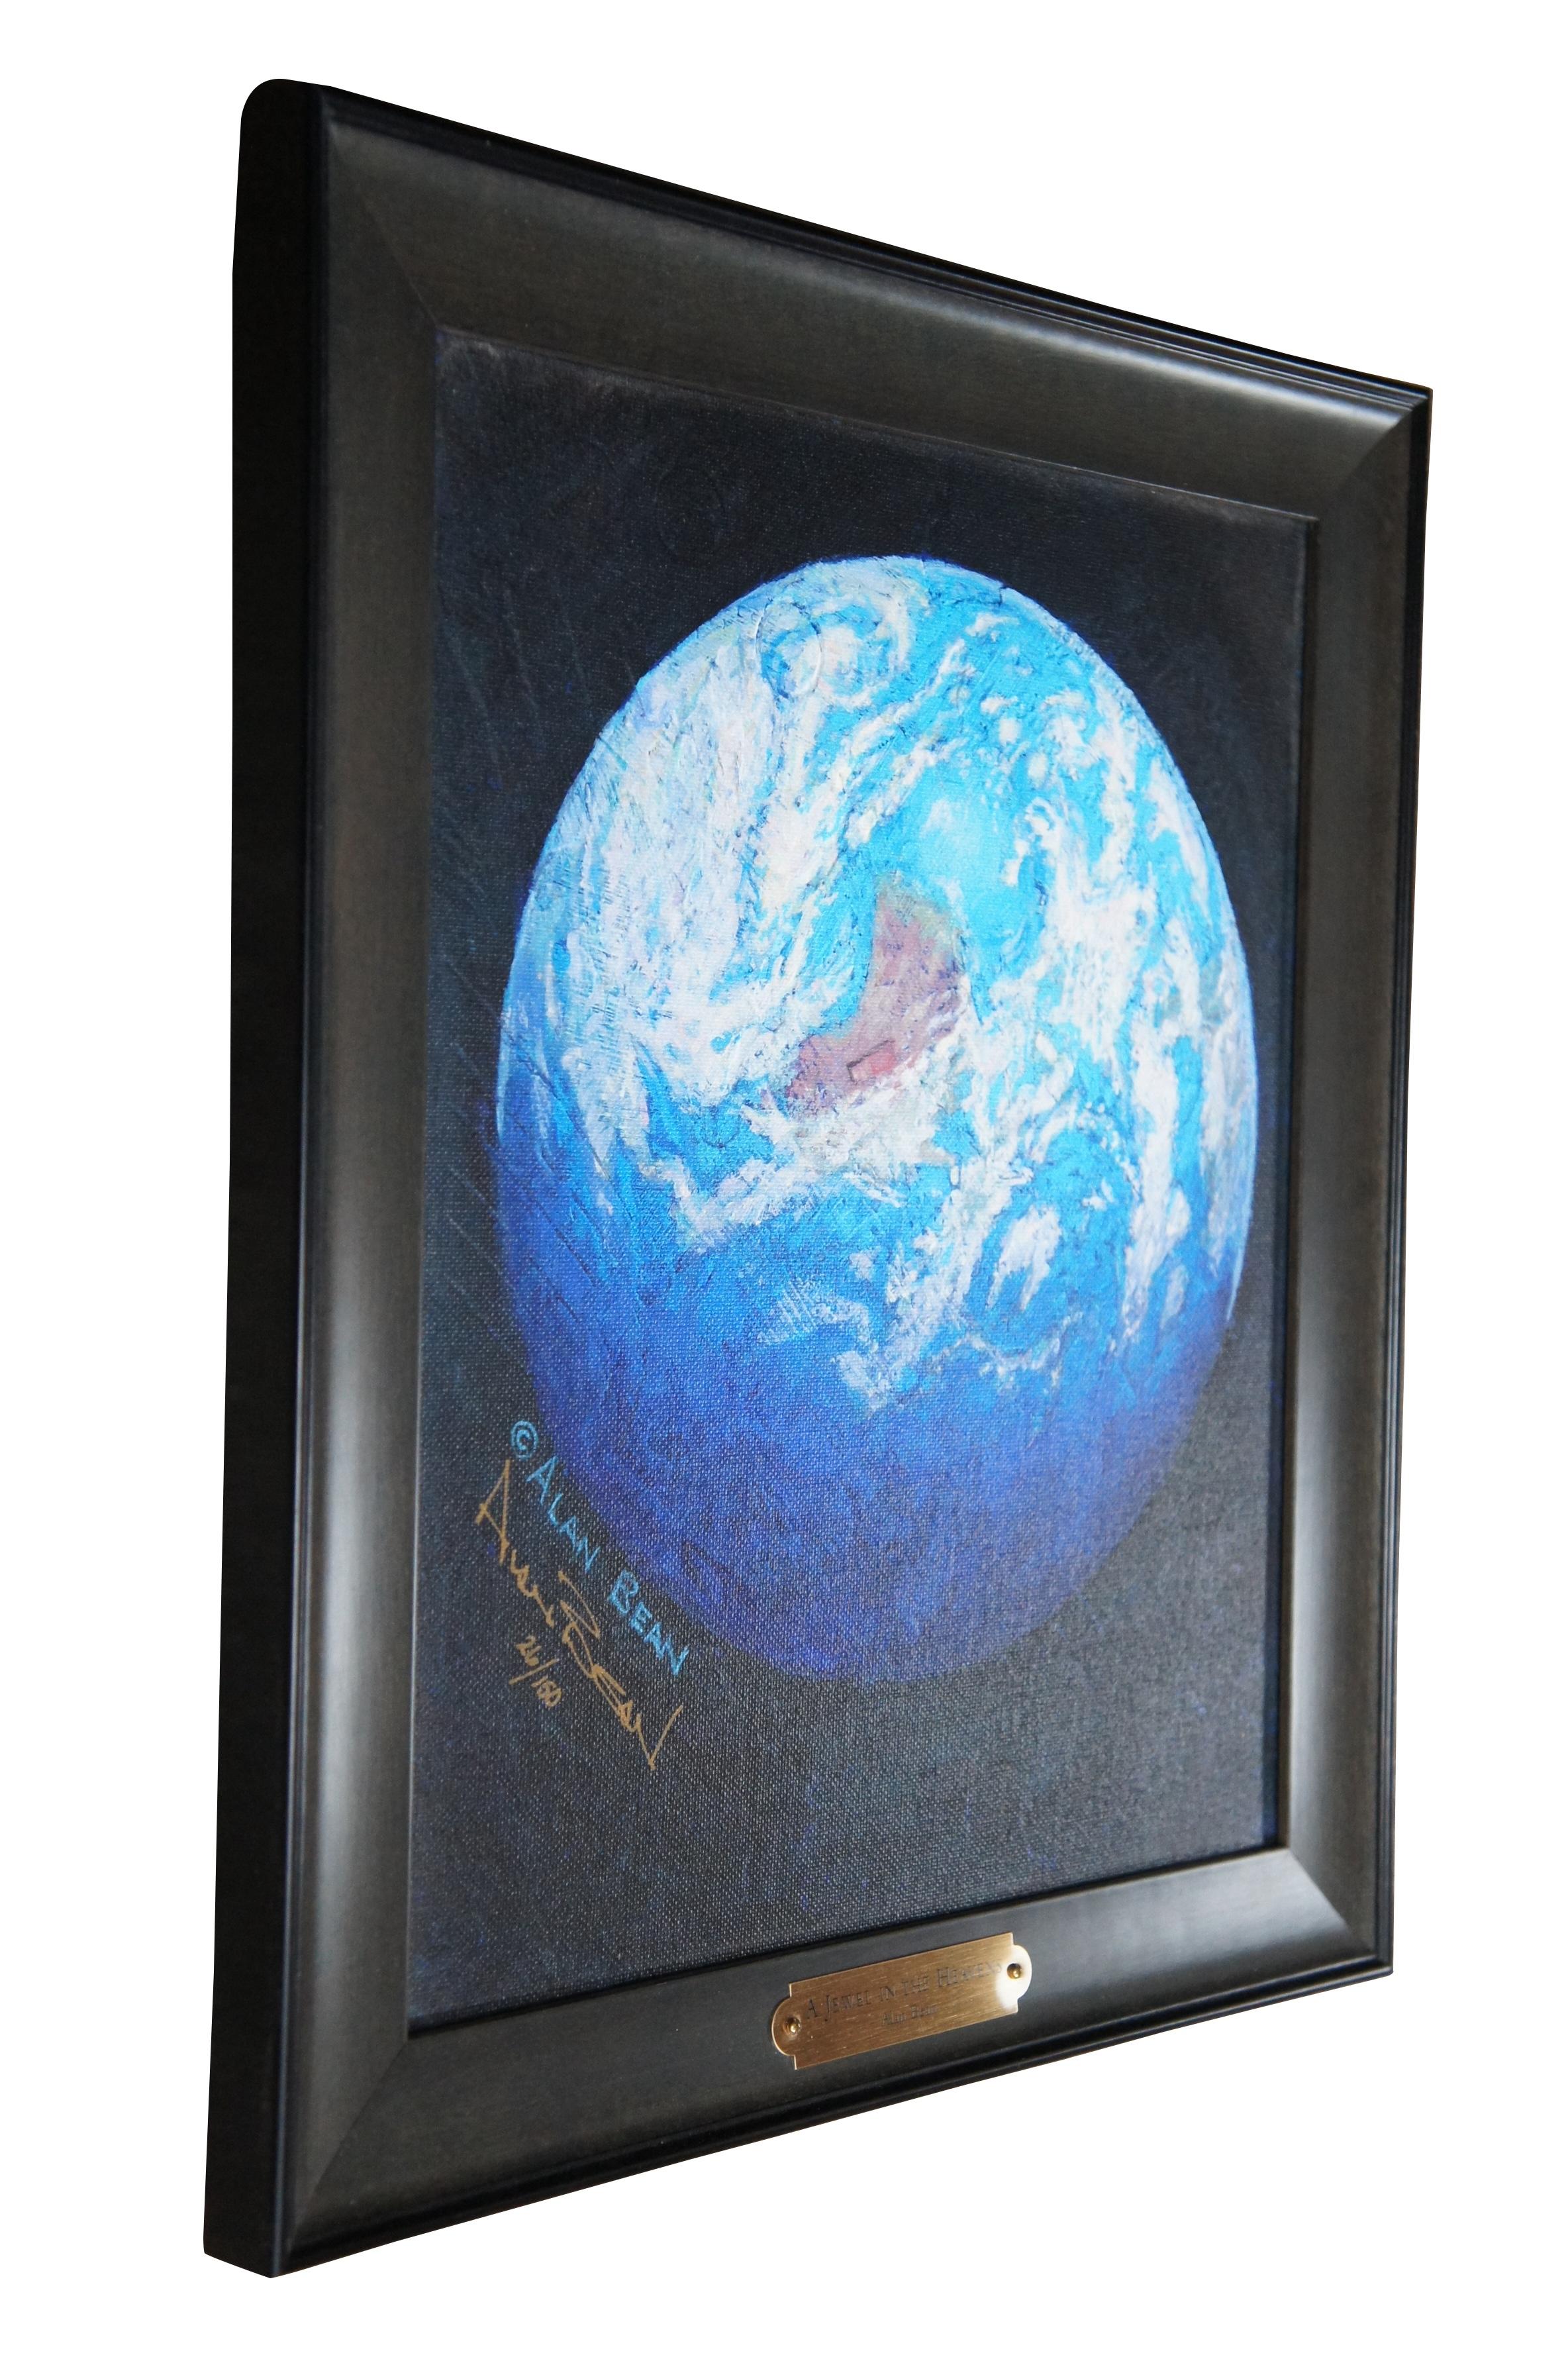 Alan Bean A Jewel In The Heavens Earth From Space Giclee auf Leinwand 17